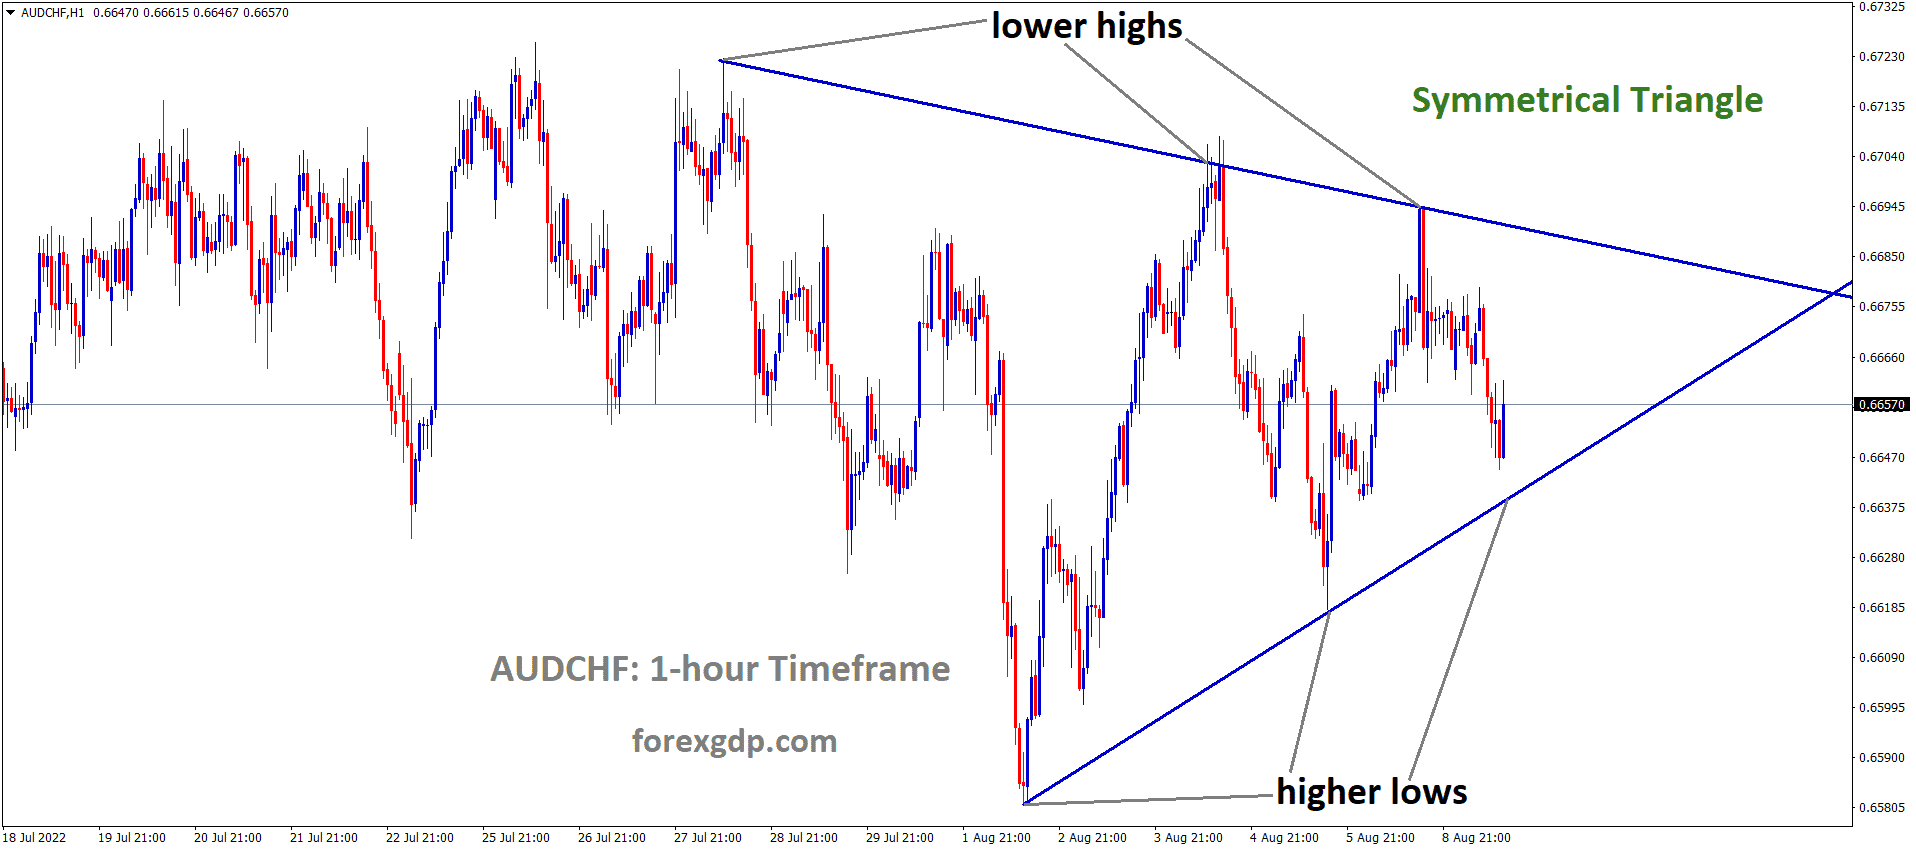 AUDCHF is moving in the Symmetrical triangle pattern and the market has rebounded from the Bottom area of the pattern